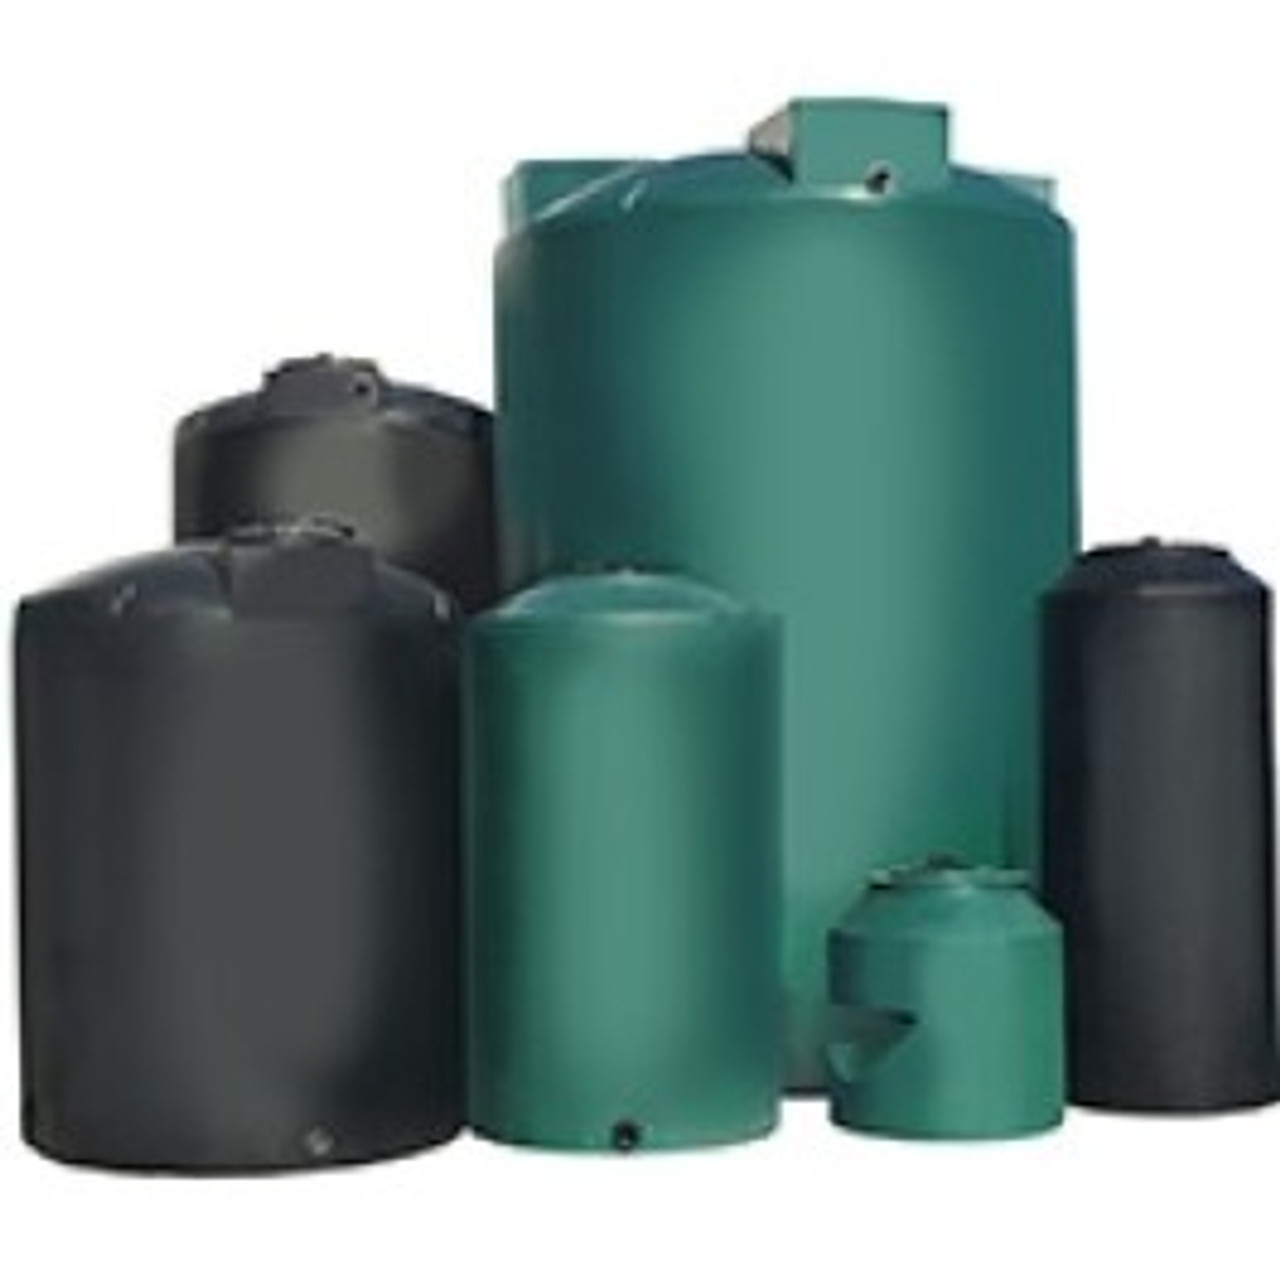 An image of a 550 Gallon Chem-Tainer Gray Plastic Vertical Water Storage Tank | TC4594IW-GRAY